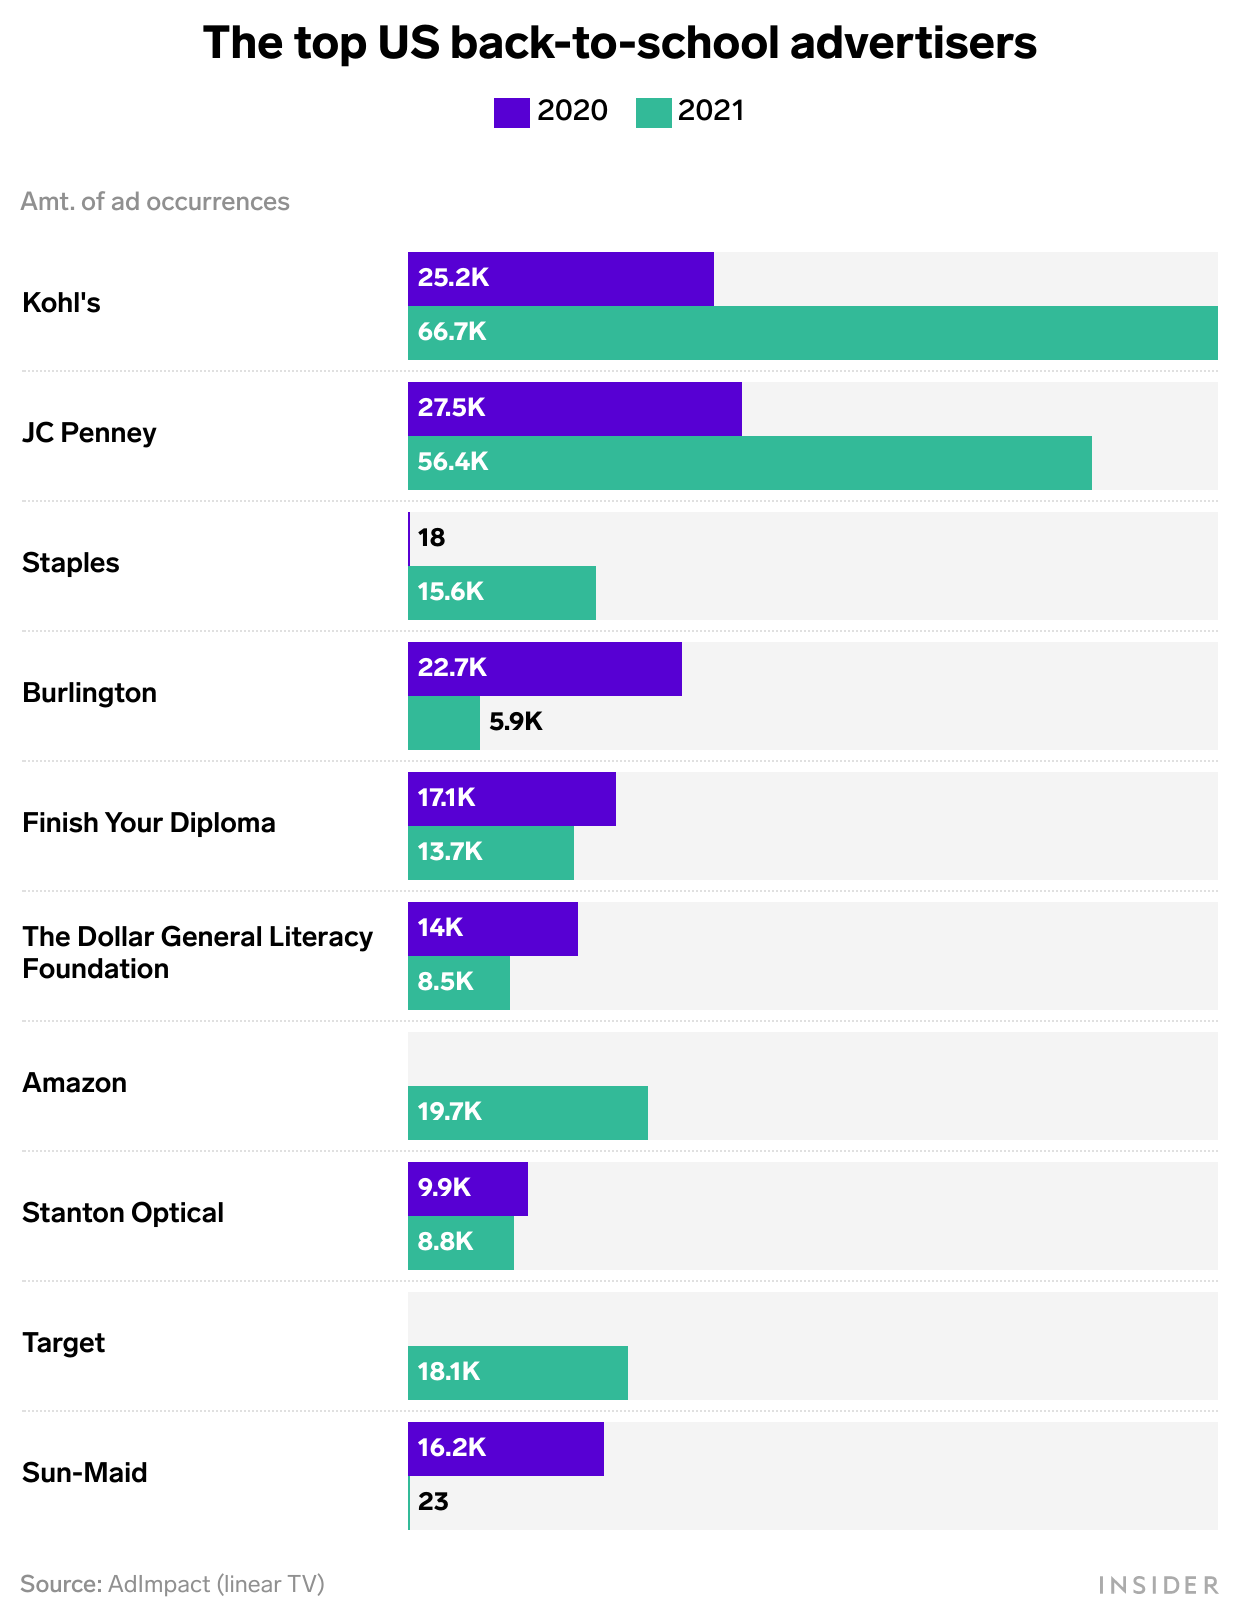 Stacked bar chart of US back-to-school advertisers from 2020 to 2021 with Kohls and JC Penney in the lead